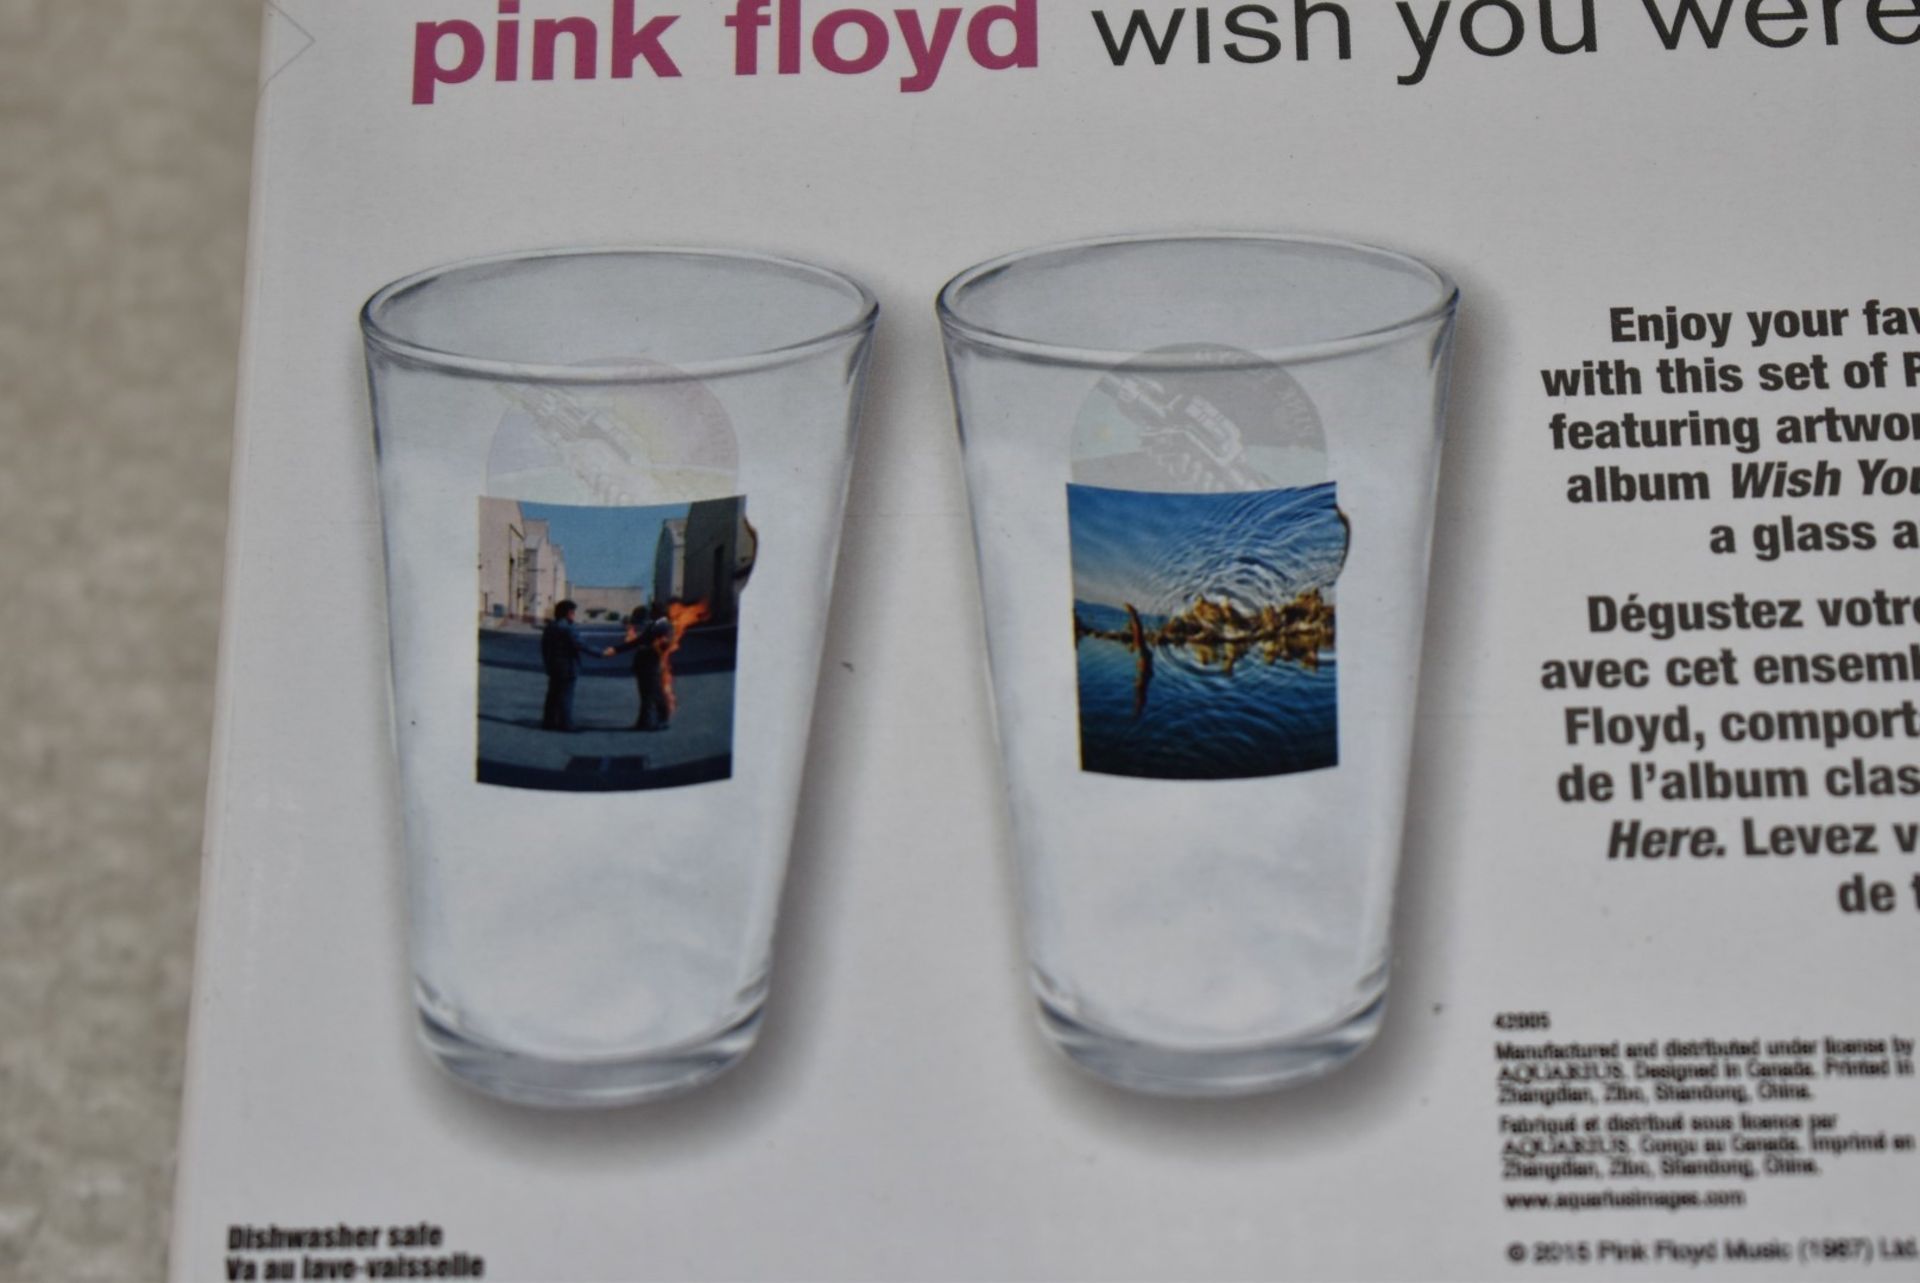 3 x Sets of Pink Floyd 'Wish You Were Here' Drinking Glass Gift Packs - Each Pack Contains 2 x 16oz - Image 7 of 8